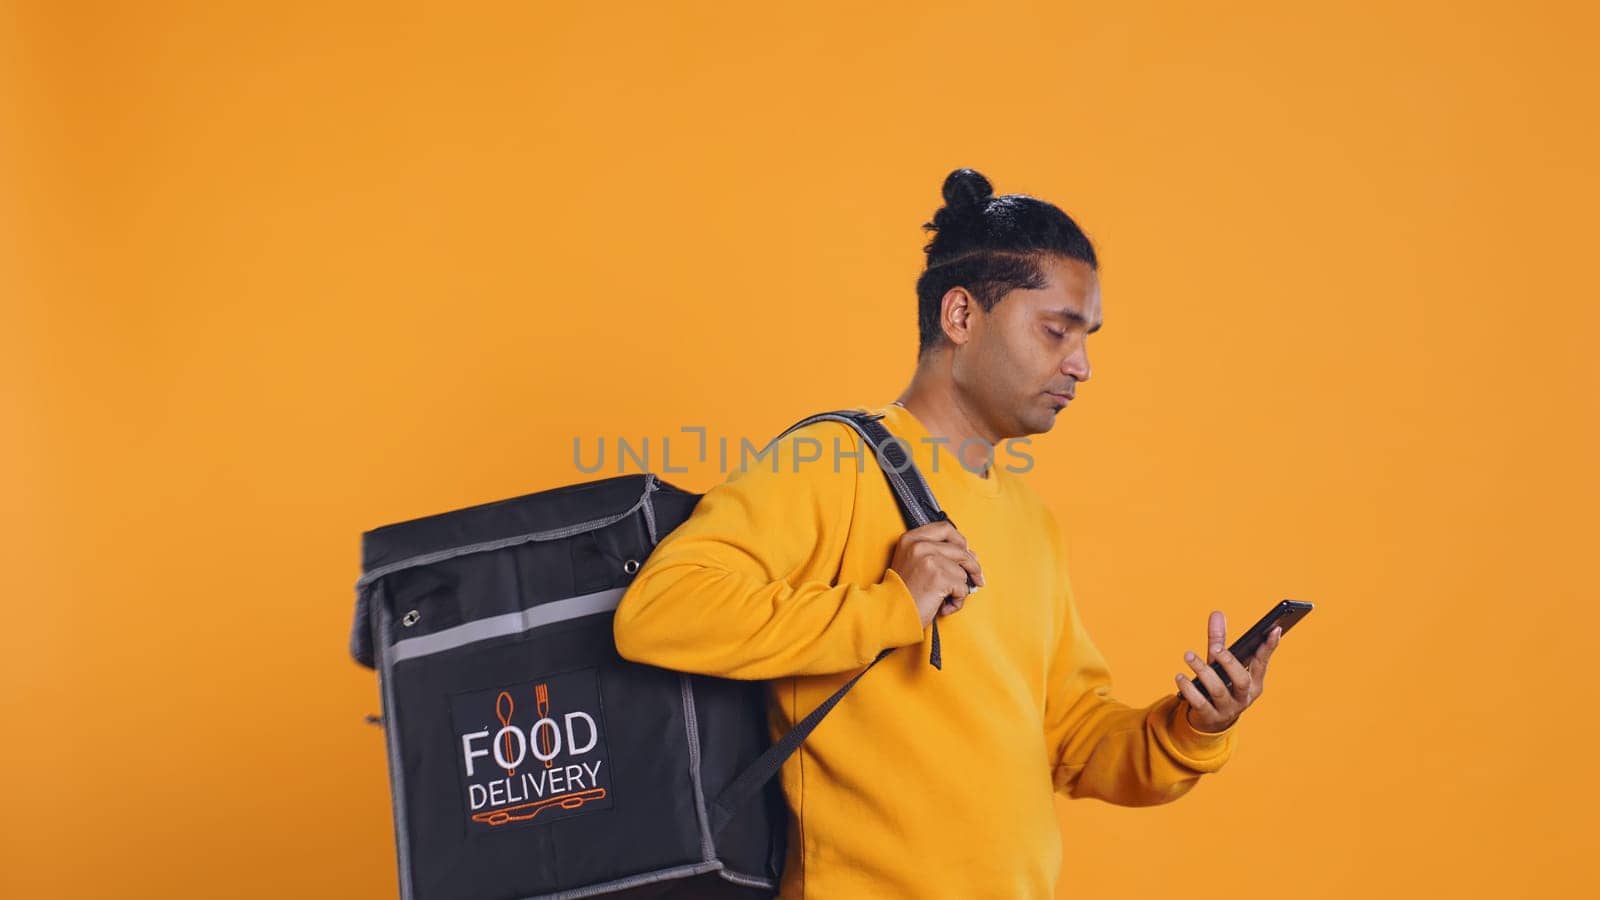 Man holding thermal backpack answering phone, fulfilling clients orders, studio backdrop. Food delivery service worker doing delivery to customers, talking on smartphone, camera B